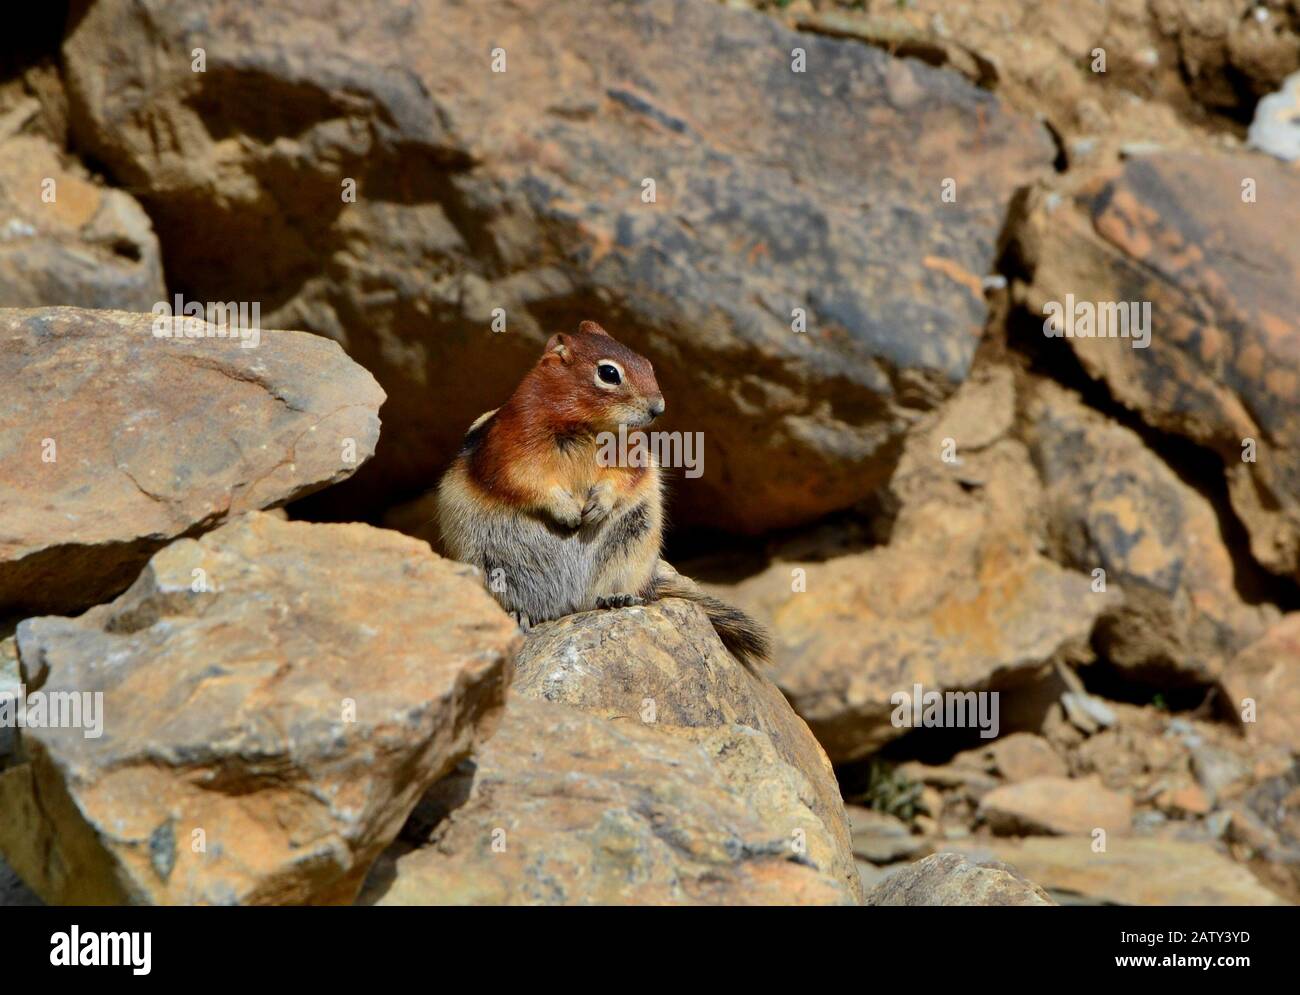 Cute little chipmunk sitting on stone peeks curiously. Beautiful sunny day, rocky mountains. Stock Photo